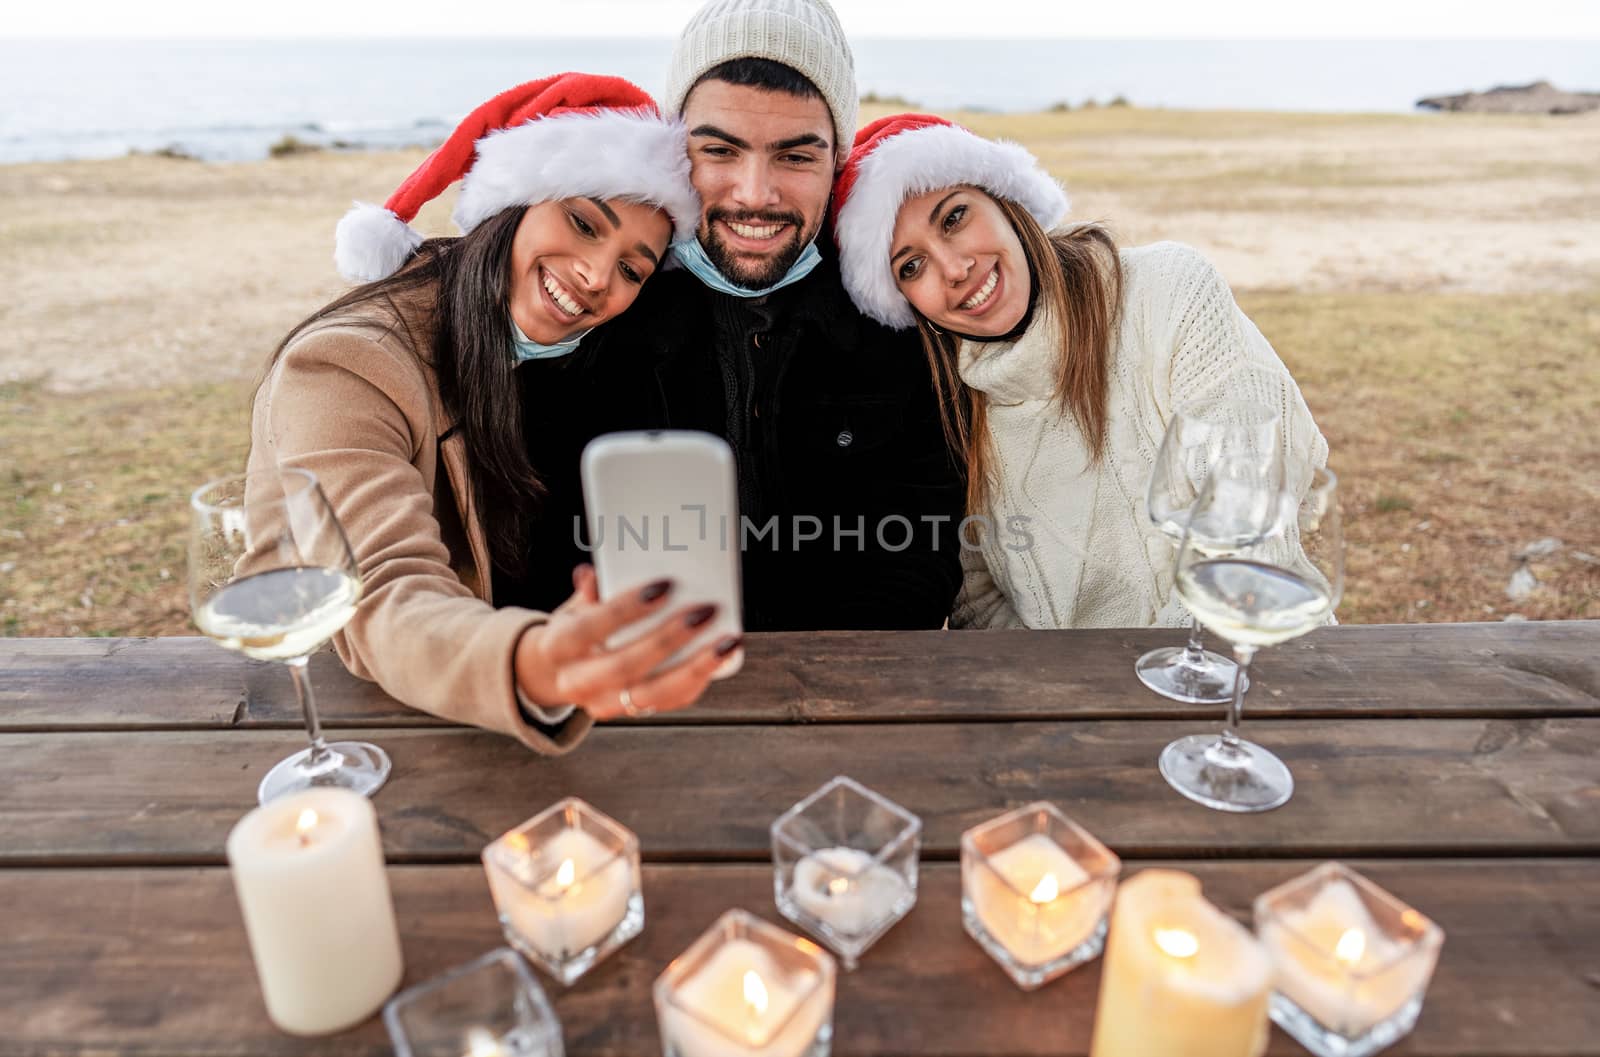 Three mixed race friends with lowered mask sitting on a wooden table outdoor in sea resort celebrating Christmas and New Year event making selfie with wine glasses - Smiling women posing in Santa hat